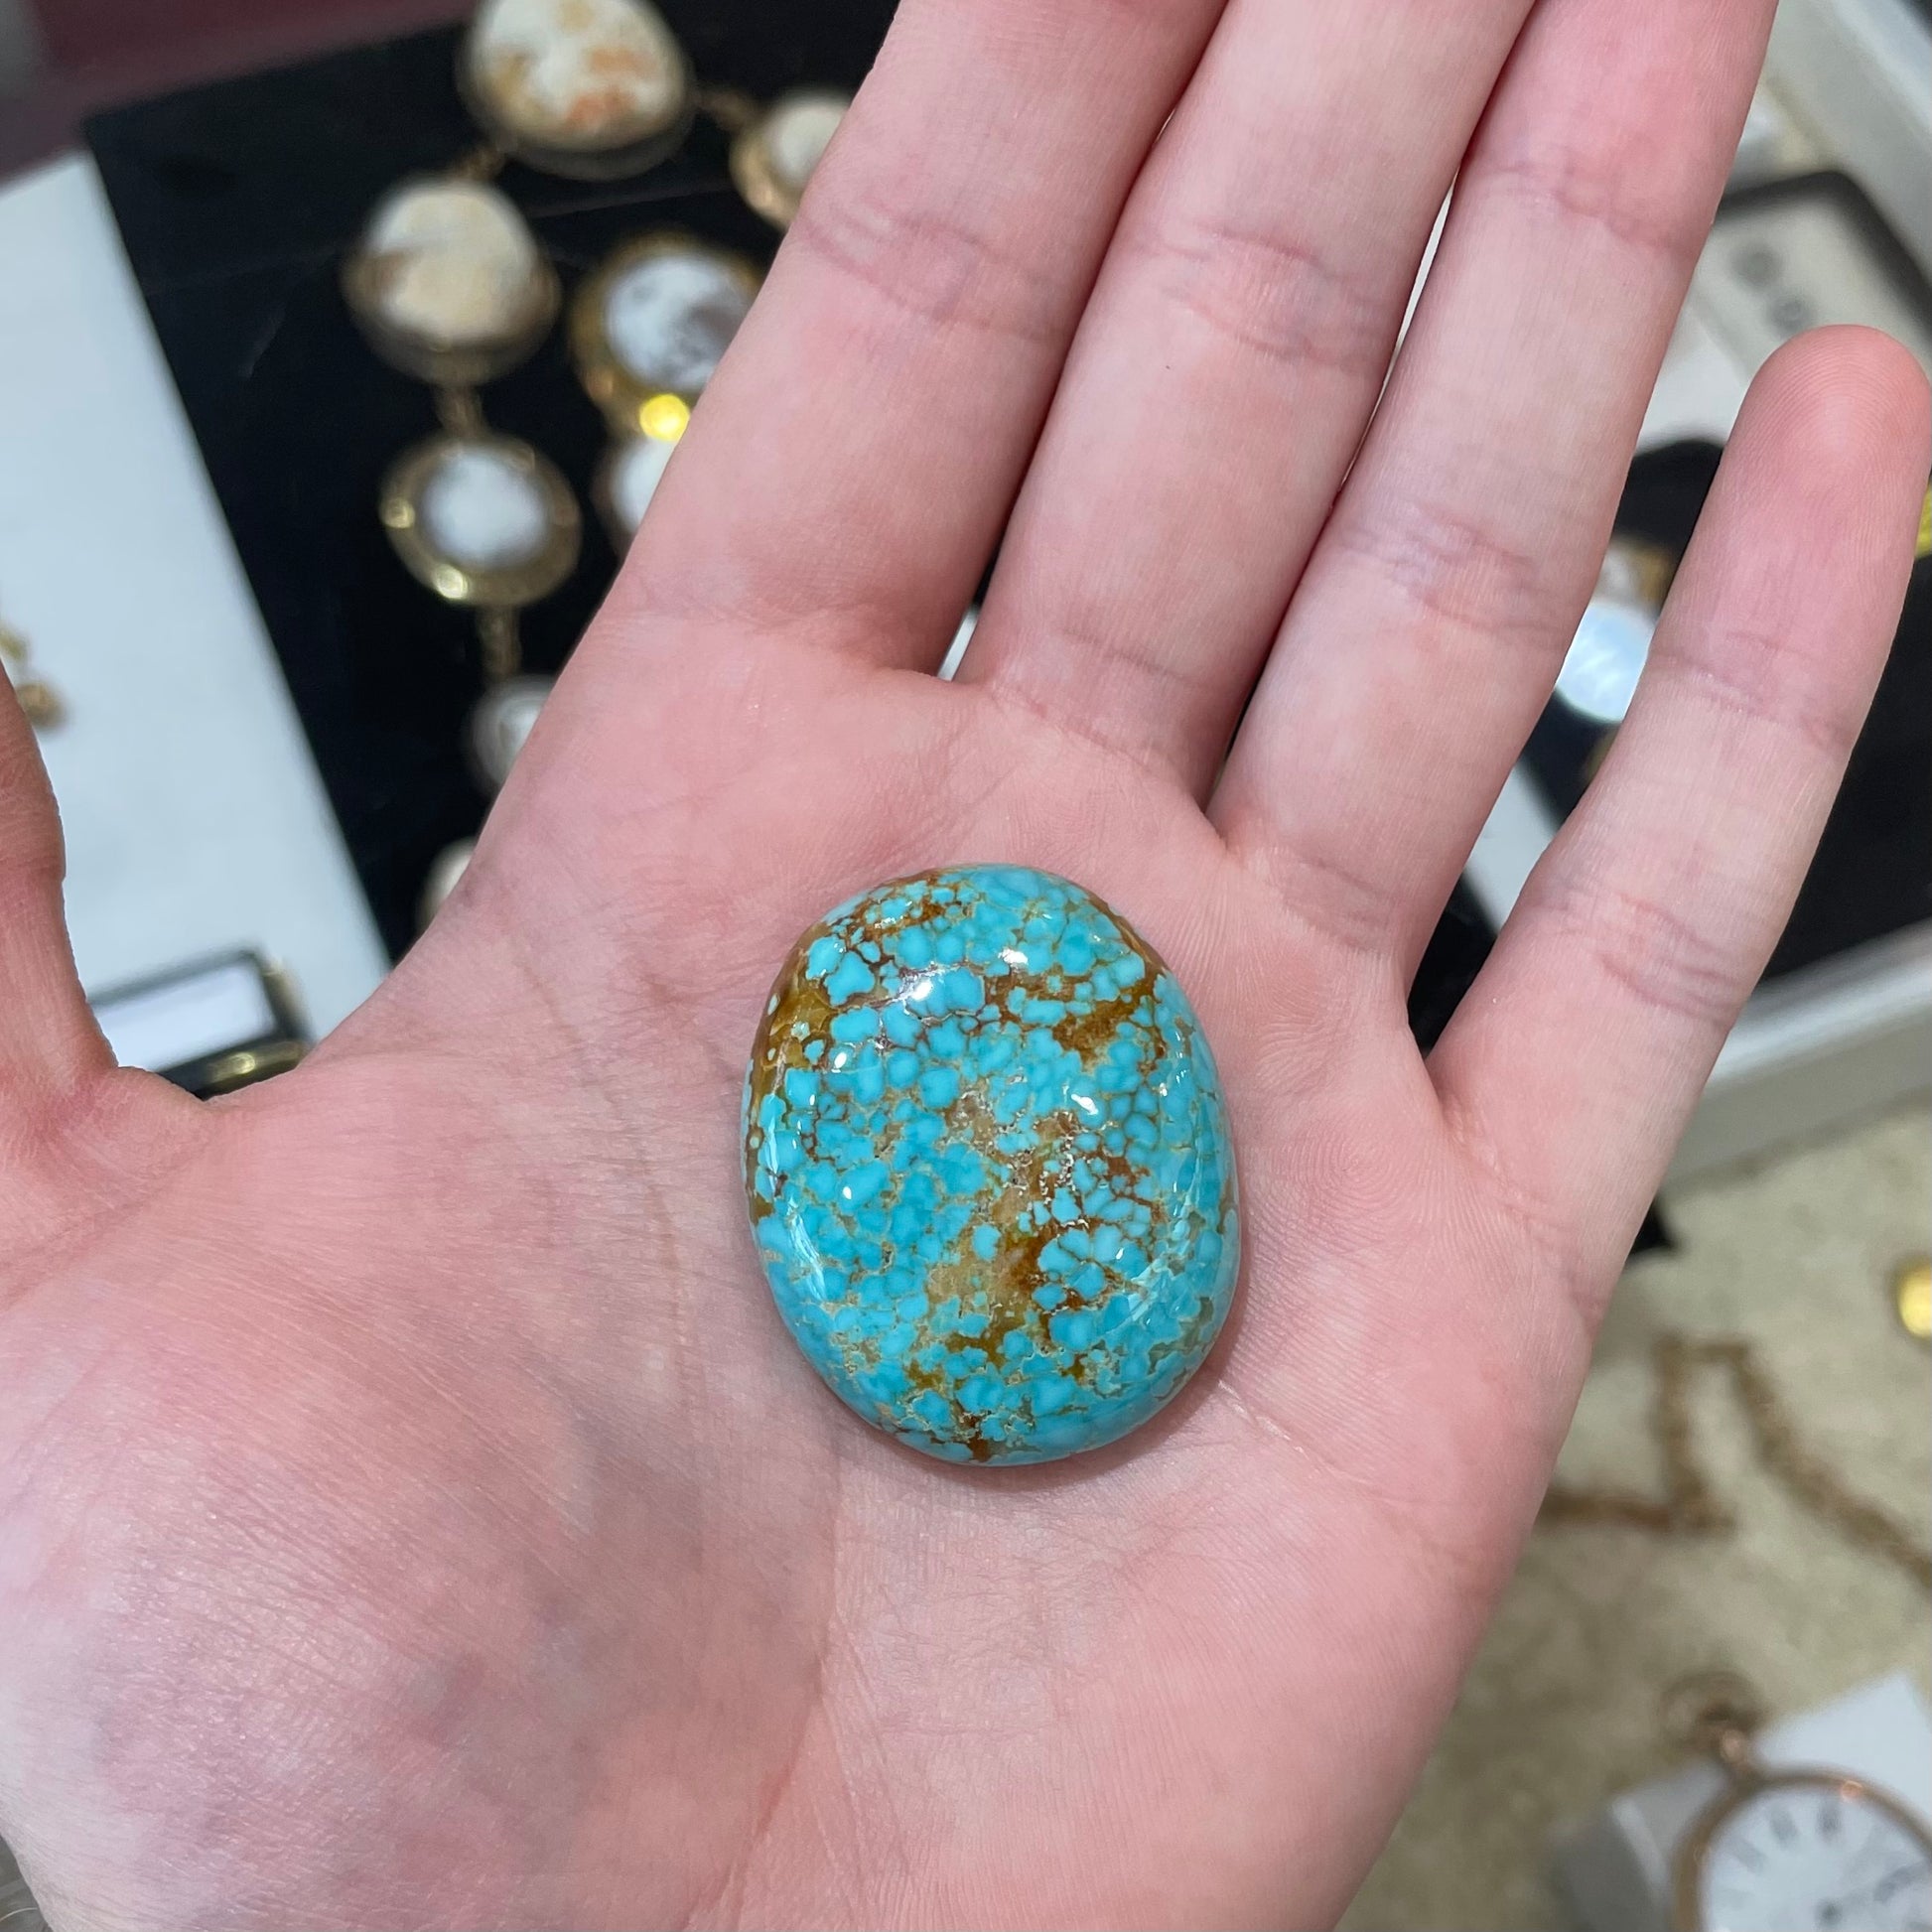 A loose, oval cut turquoise cabochon from Number 8 Mine, Nevada.  The stone is blue with a golden brown webbed matrix.